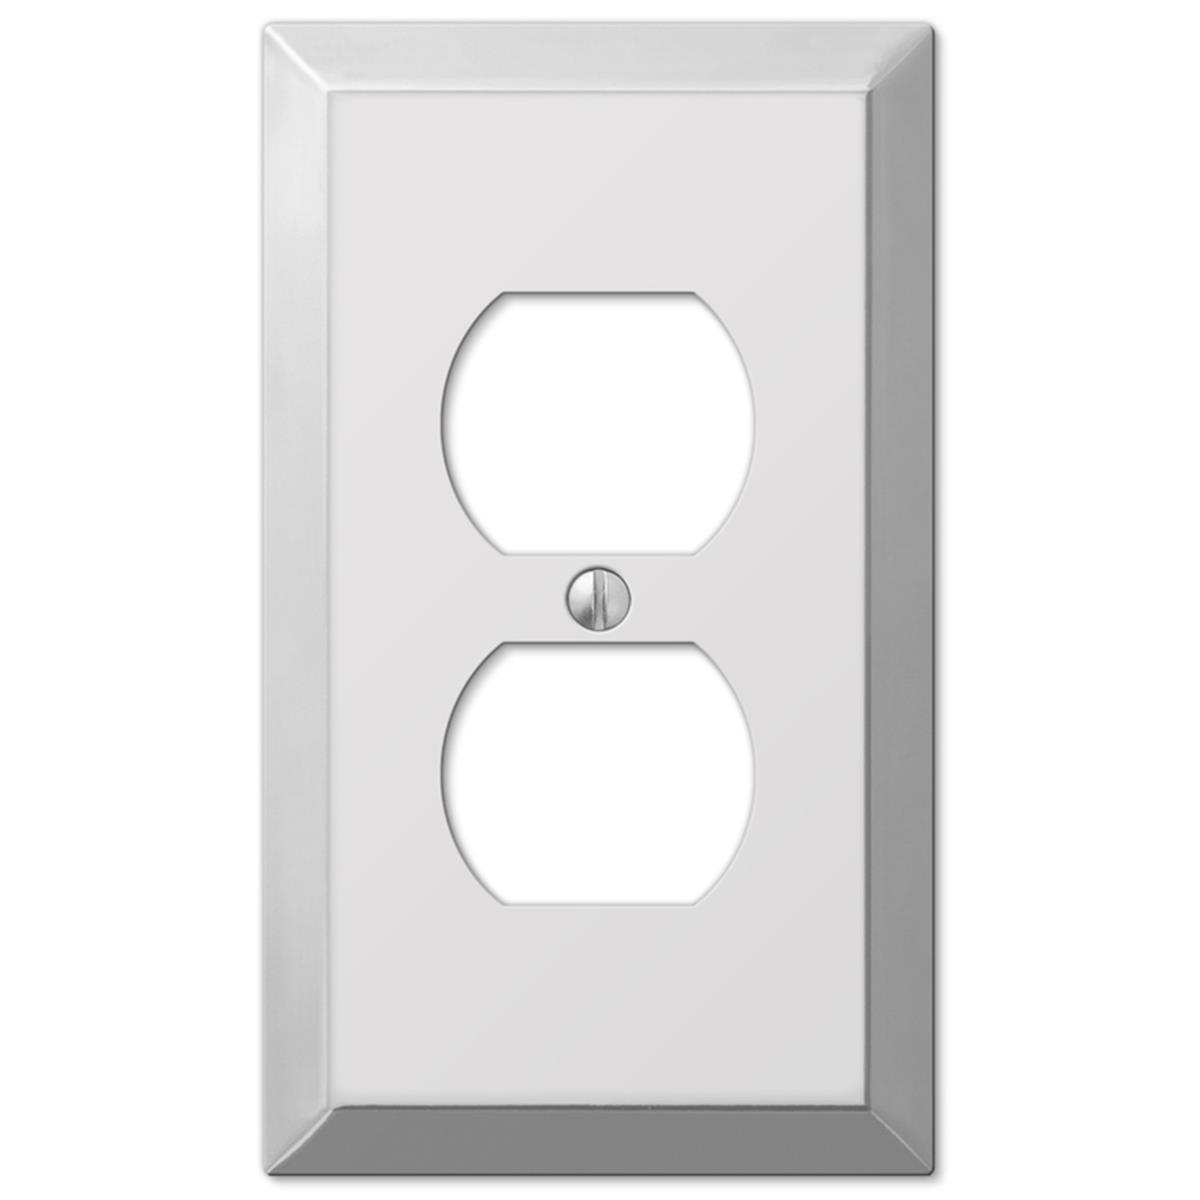 Picture of Amertac Holdings 3501558 1 Duplex Polished Chrome Wallplate